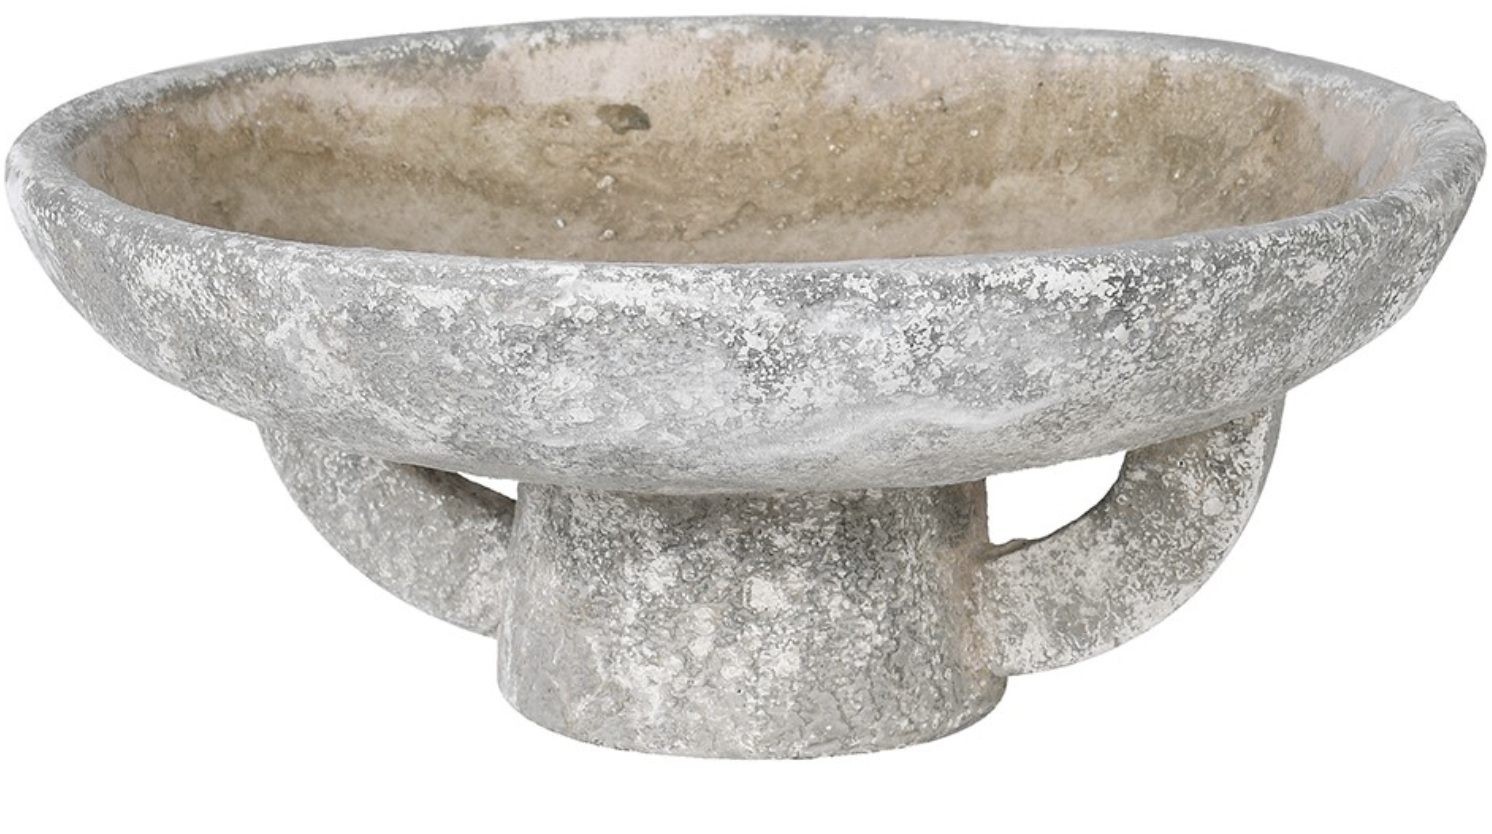 THE BROWNHOUSE INTERIORS Distressed footed cement bowl